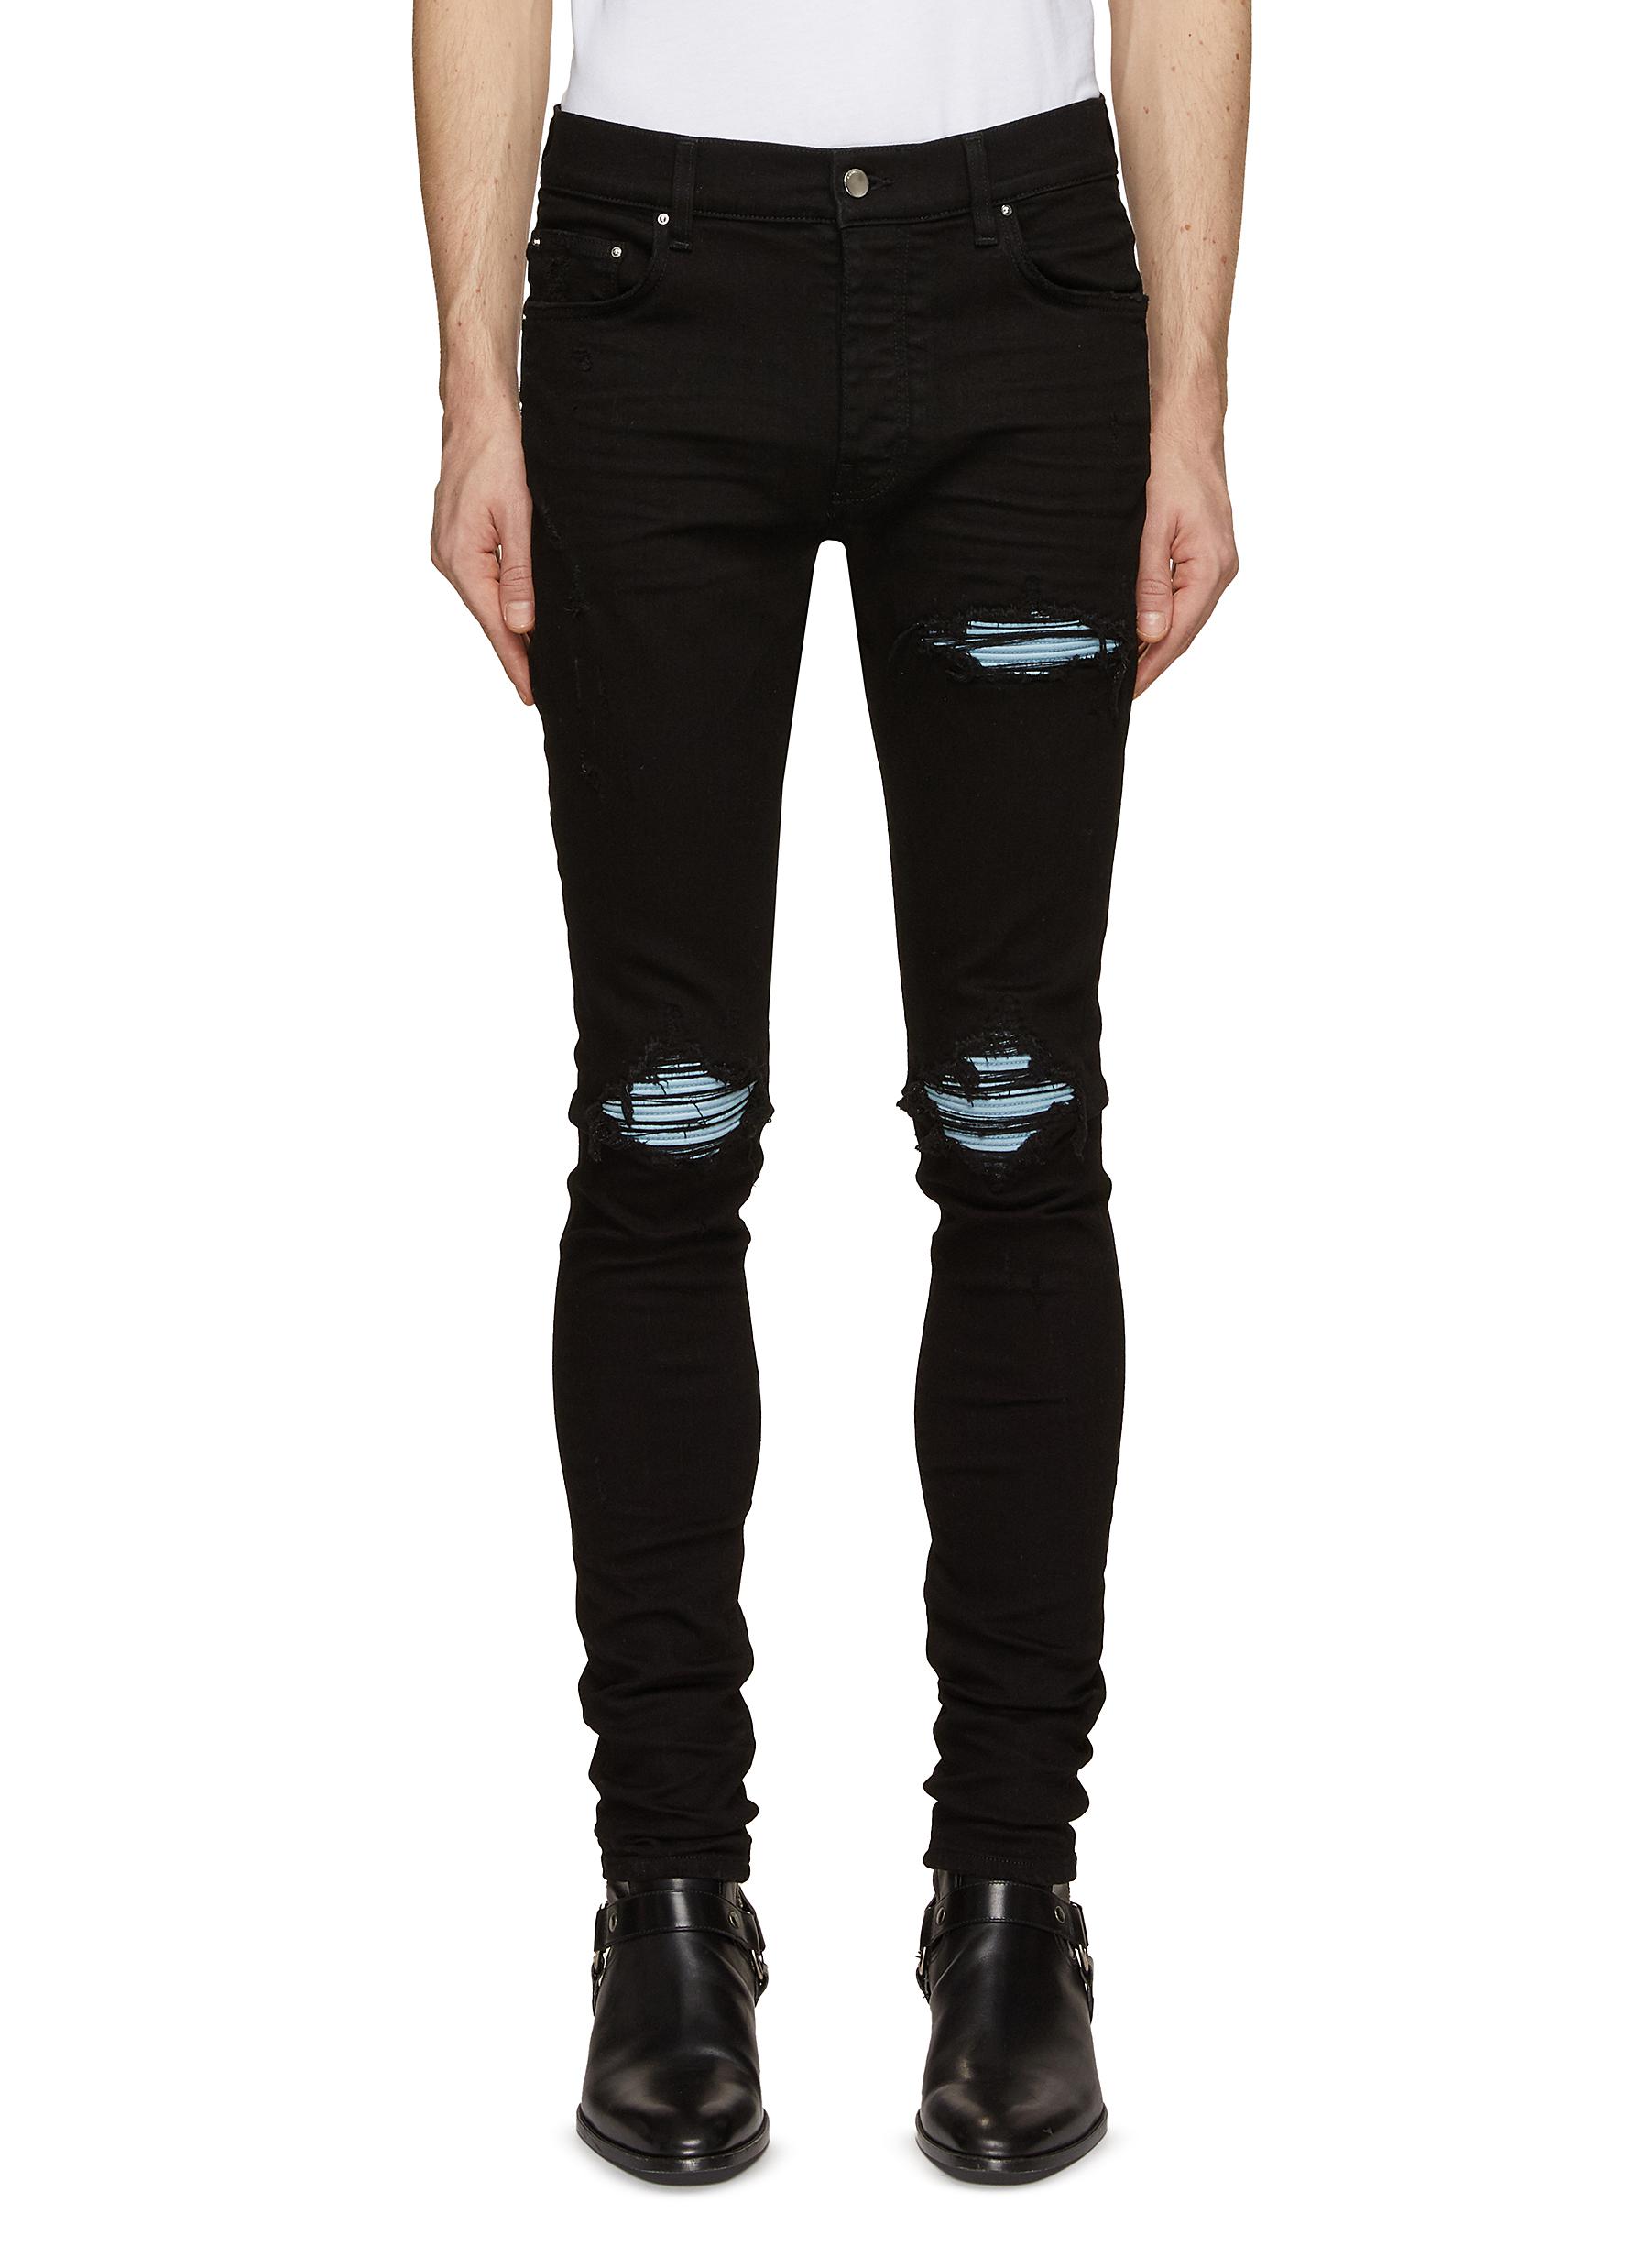 MX1 Suede Insert Skinny Jeans